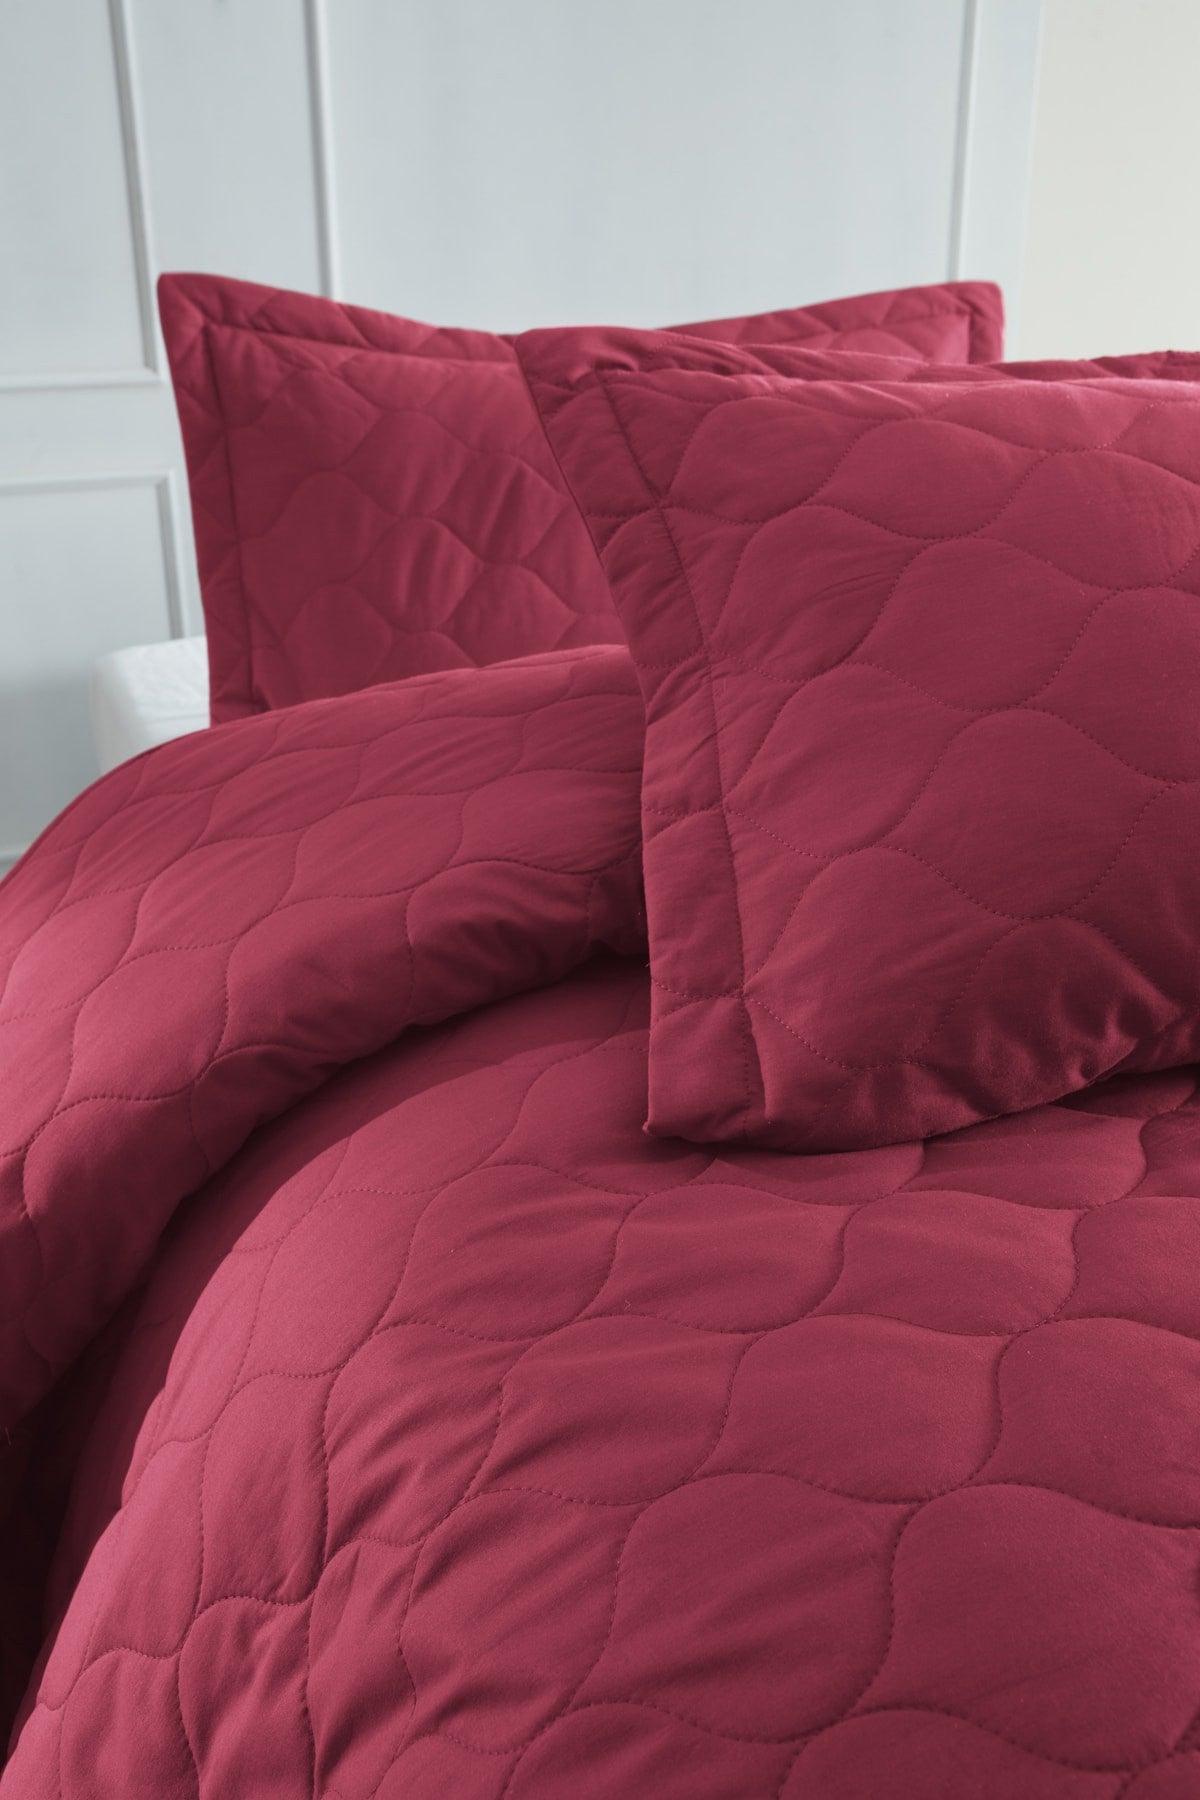 Quilted Pillow Cover 2 Pack 50x70cm Freshcolor Claret Red - Swordslife